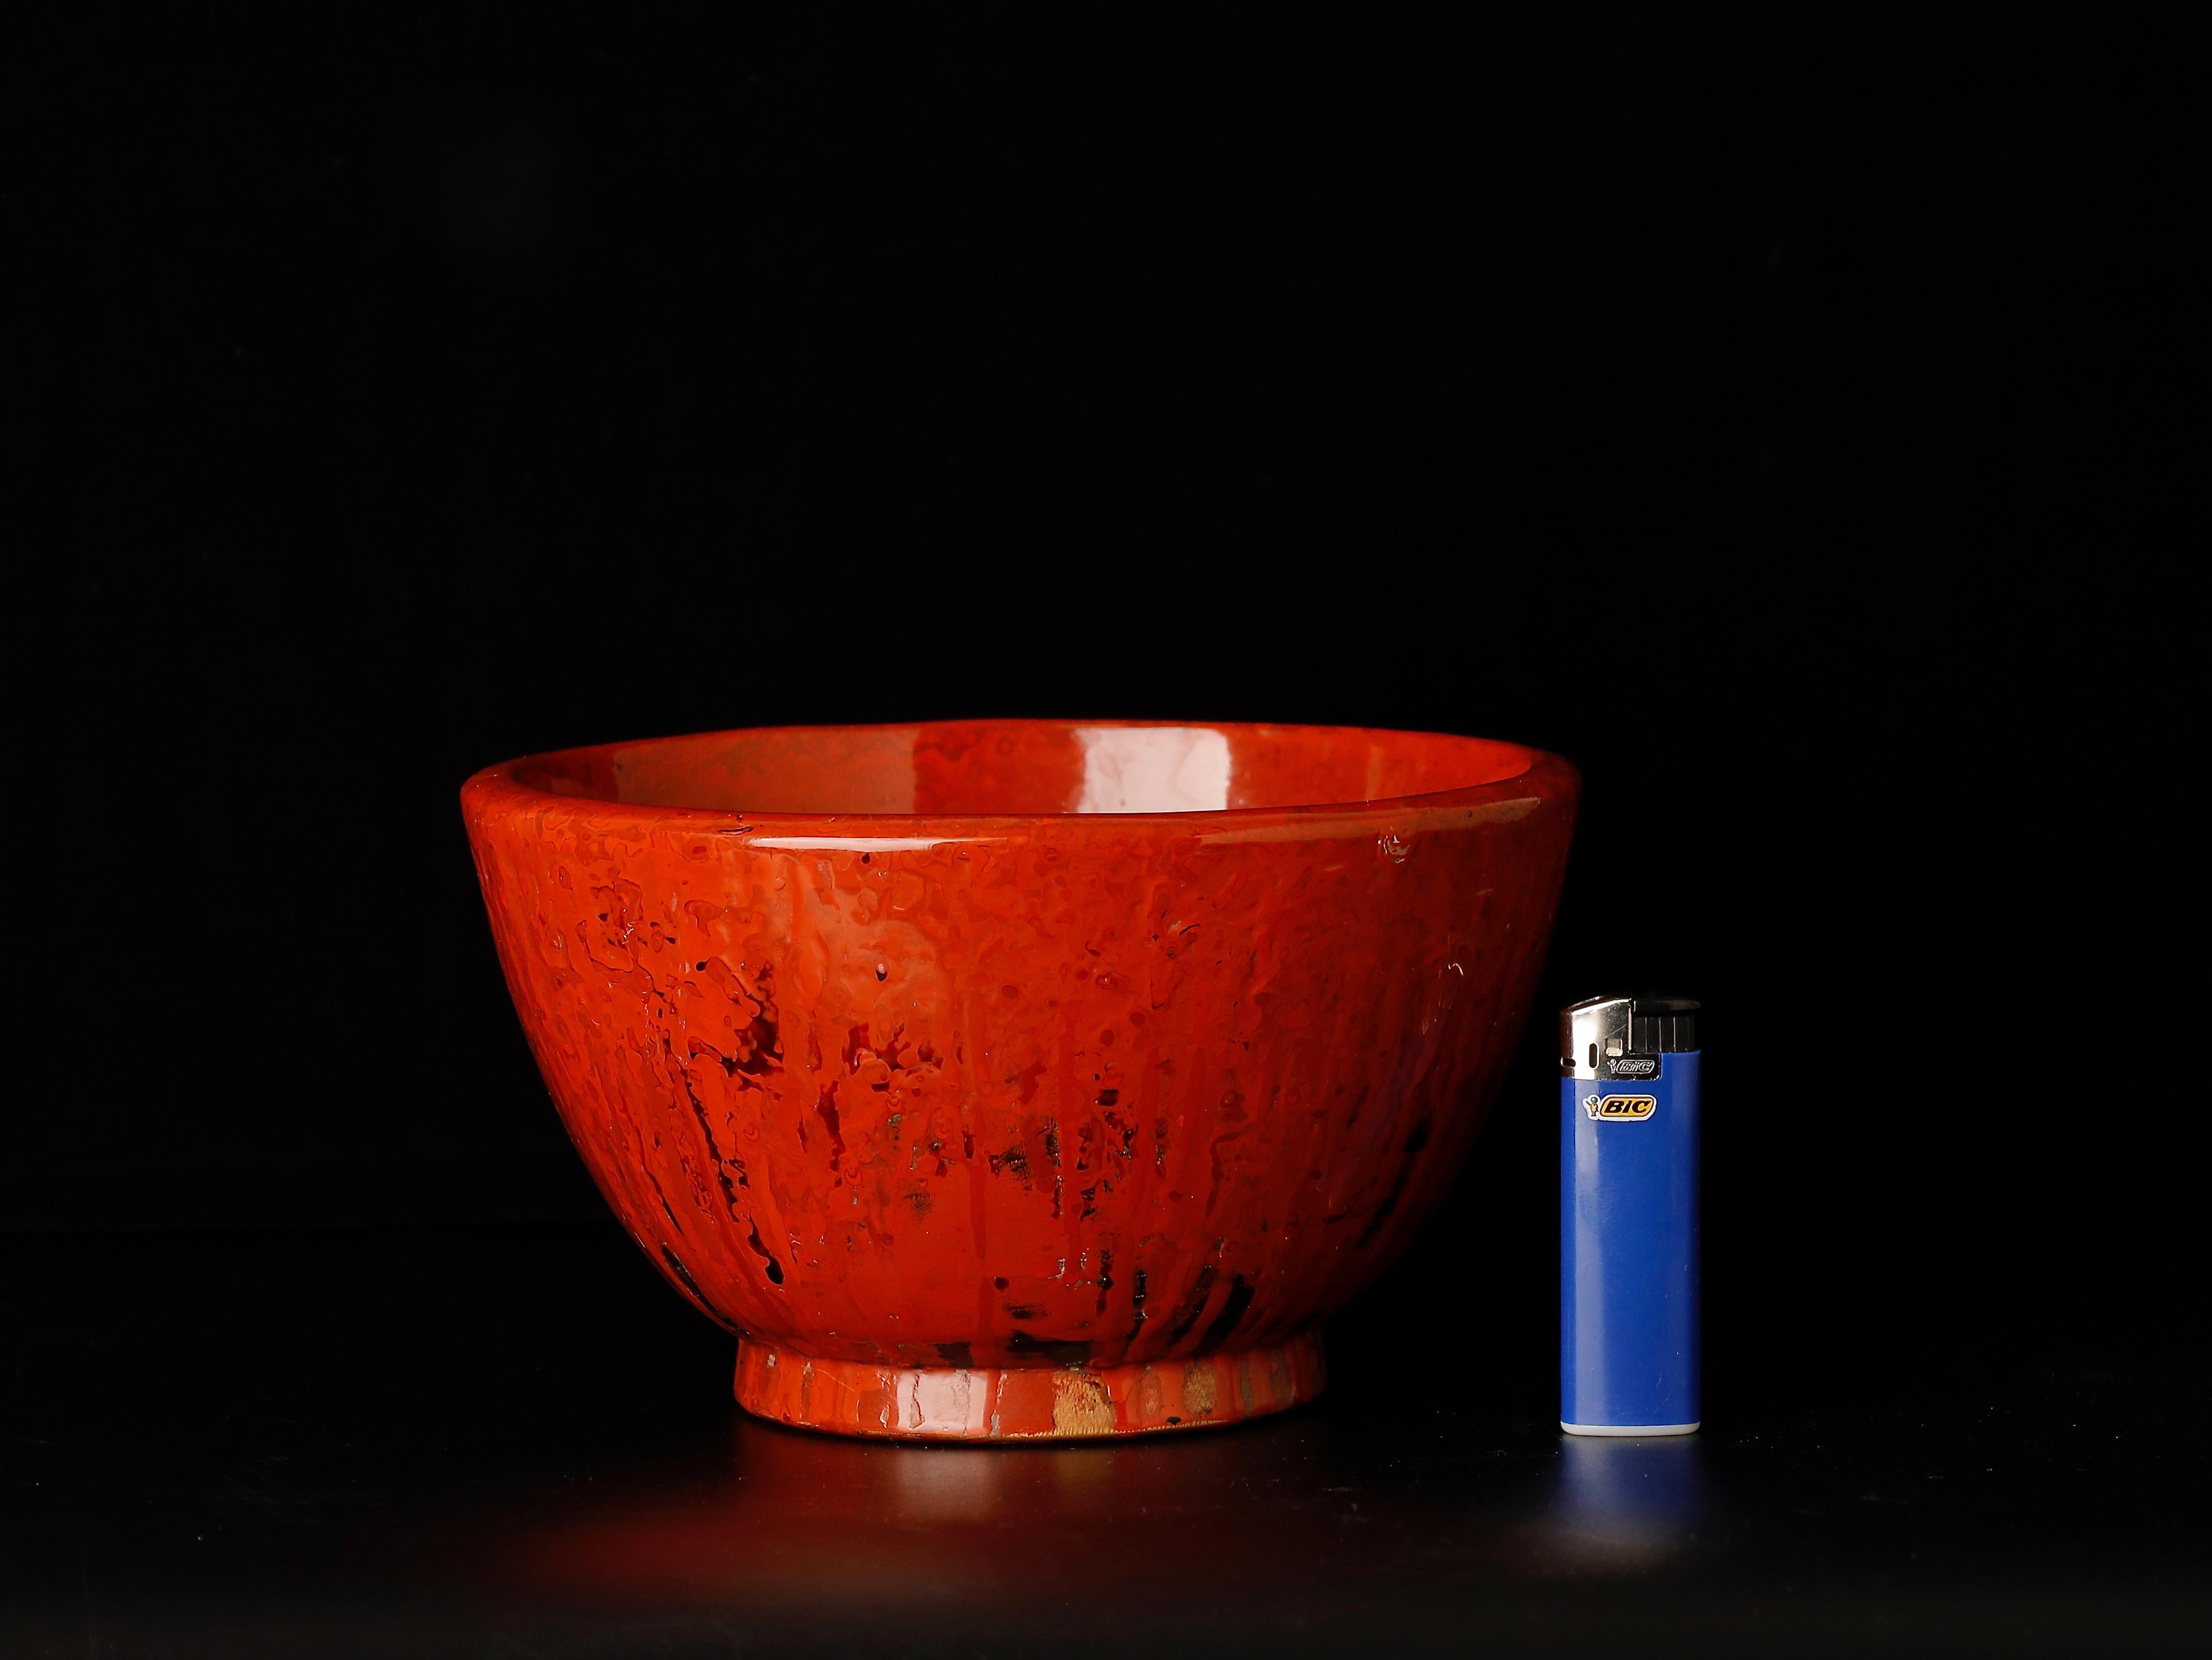 This stunning lacquer worker bowl is a true work of art, expertly crafted using the Kanshitsu bachi technique. Kanshitsu bachi is a unique Japanese lacquerware technique in which layers of cloth or hemp soaked in a lacquer solution are applied to a